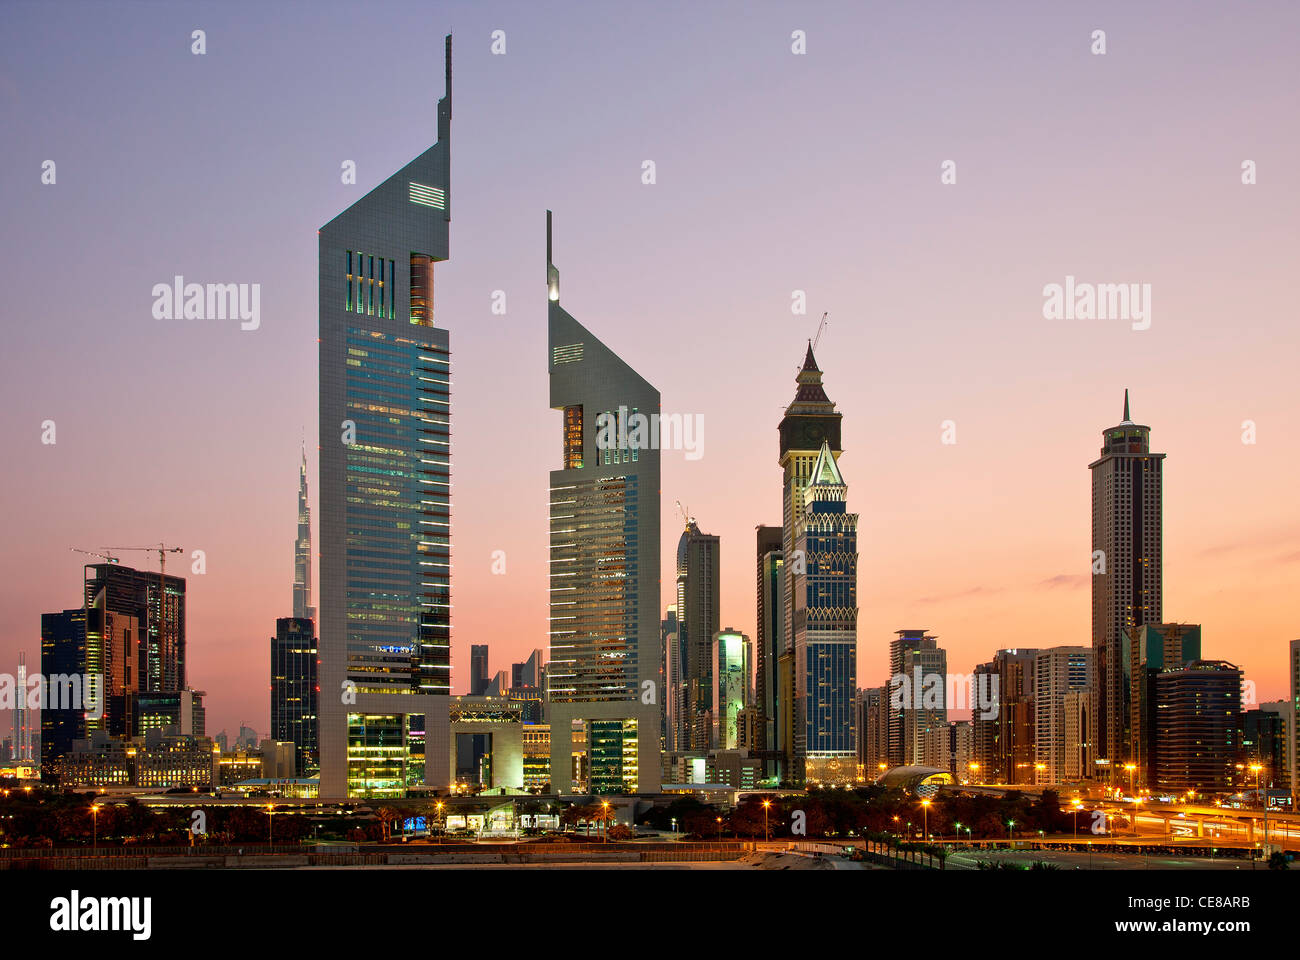 Dubai, Emirates Towers and Skyscrapers at Dusk Stock Photo